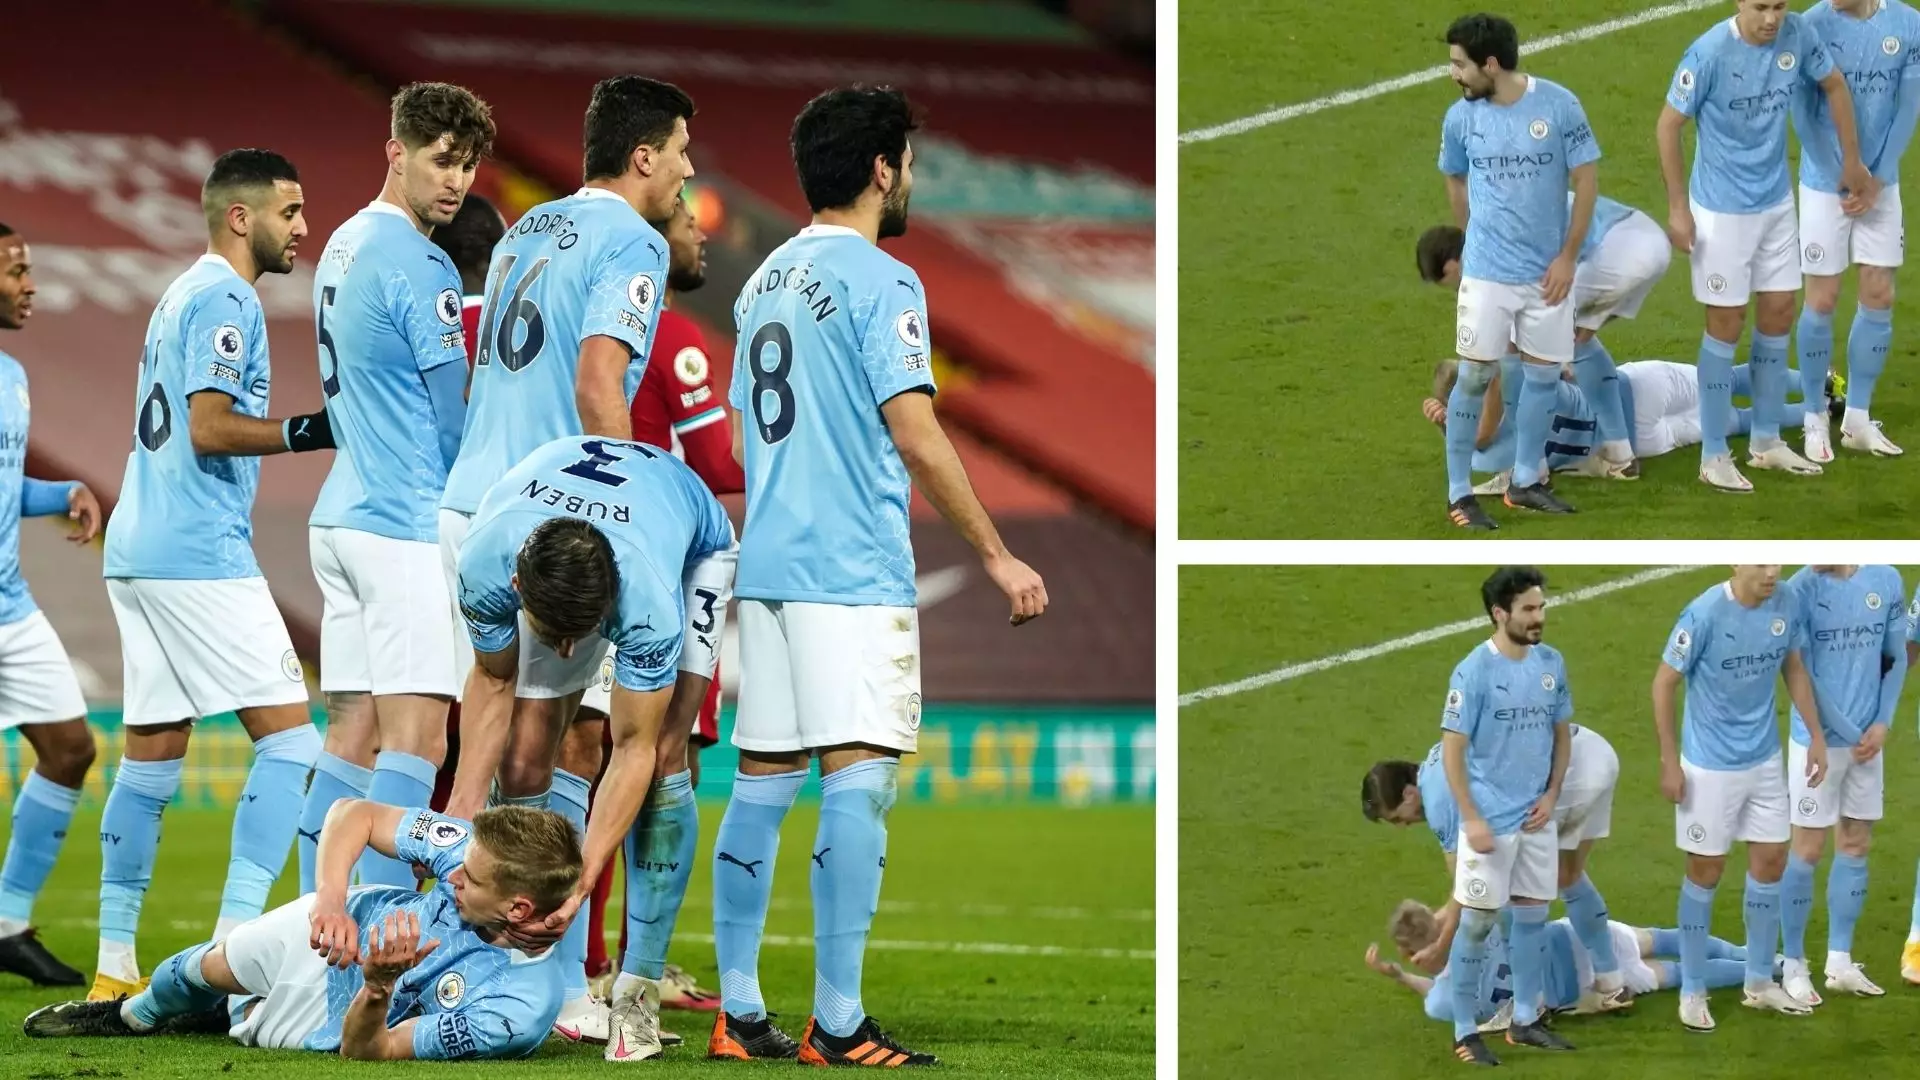 Ruben Dias Hilariously Drags Oleksandr Zinchenko Along The Pitch By His Head